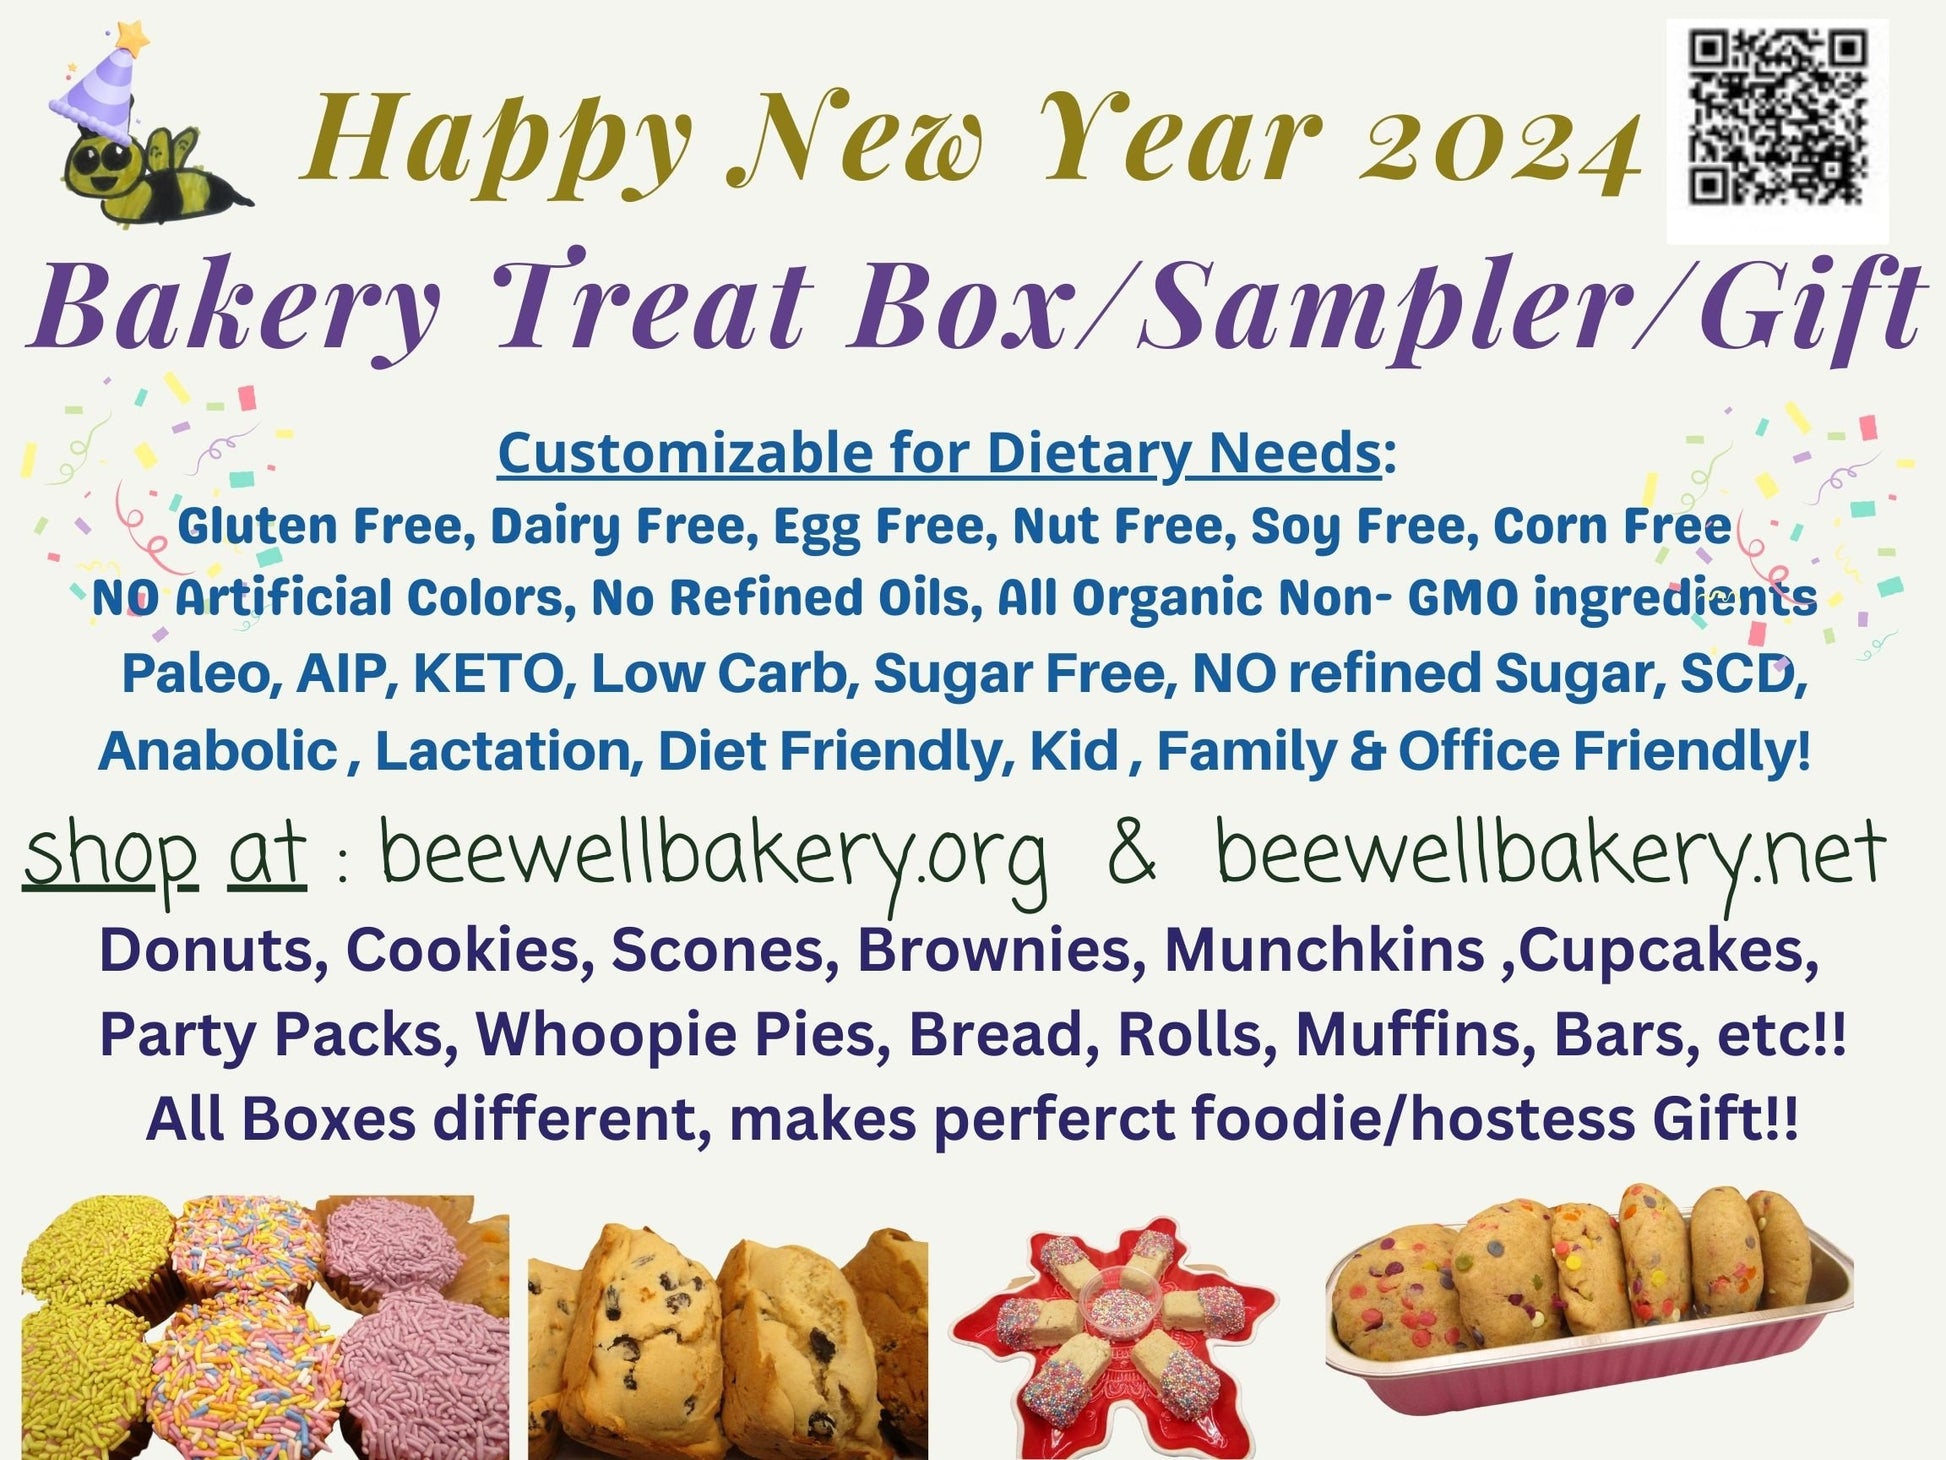 Happy New Year, Bakery Box, Gluten Free, Dairy Free, Sampler, Egg Free, Nut Free, Cookies, Donuts, AIP Paleo, KETO, Sugar Free, High Protein